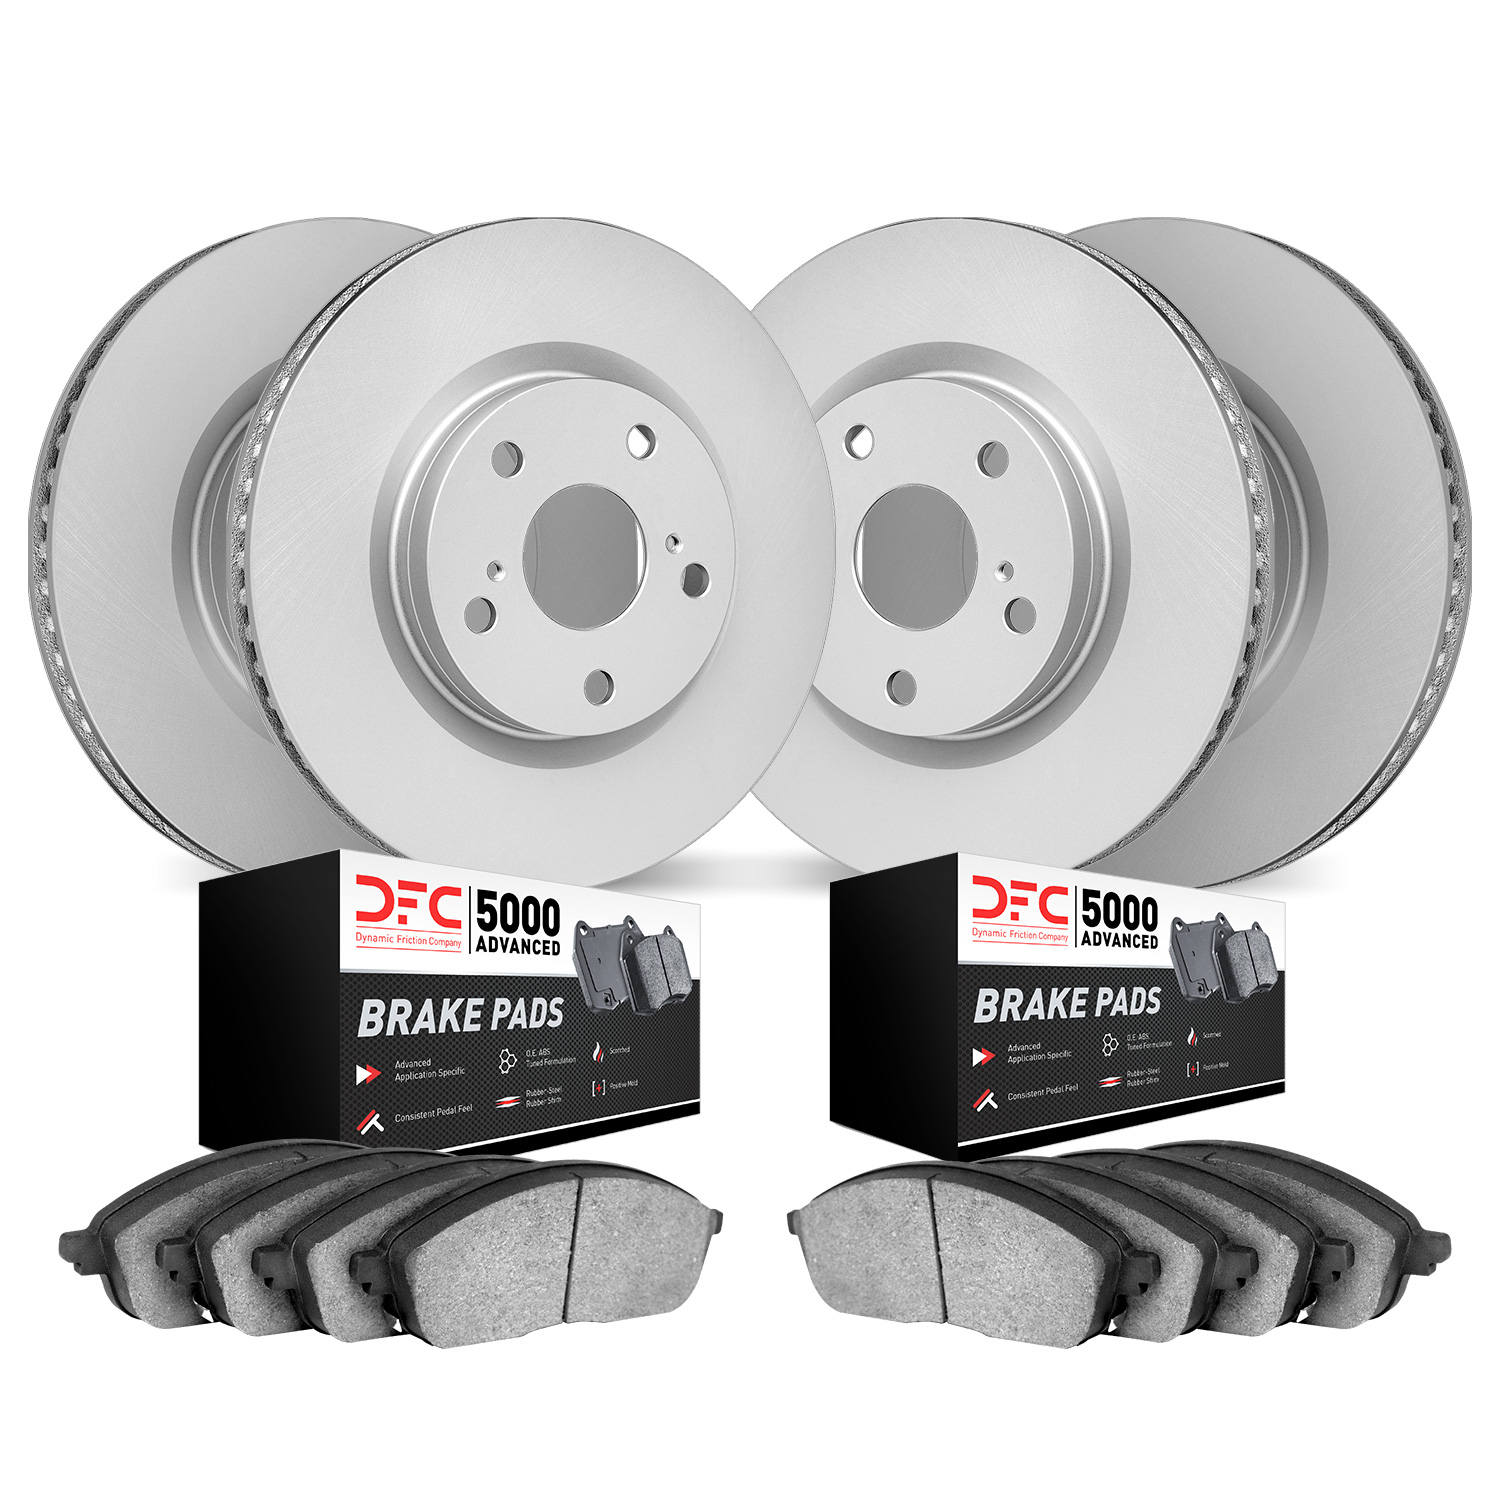 4504-54072 Geospec Brake Rotors w/5000 Advanced Brake Pads Kit, 2005-2010 Ford/Lincoln/Mercury/Mazda, Position: Front and Rear